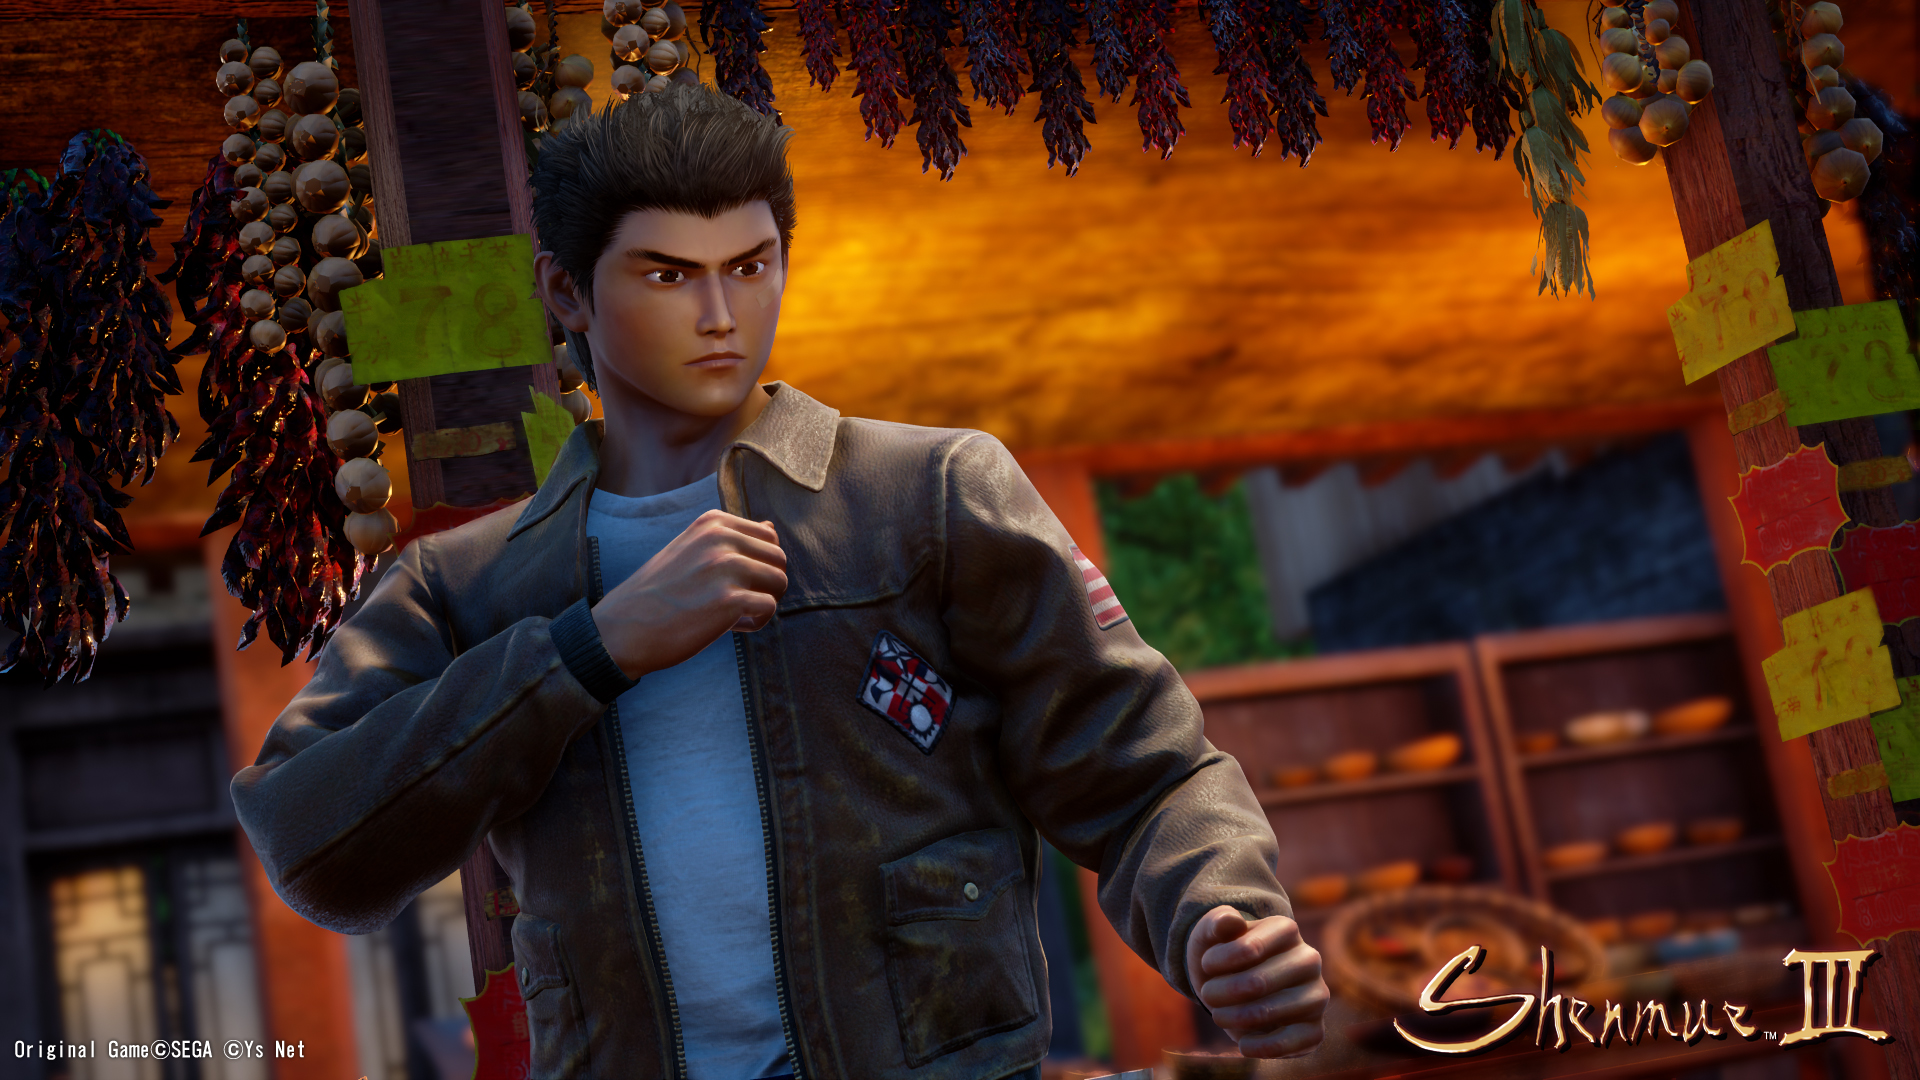 Shenmue Iii Will Offer Approximately Hours Of Gameplay Suzuki